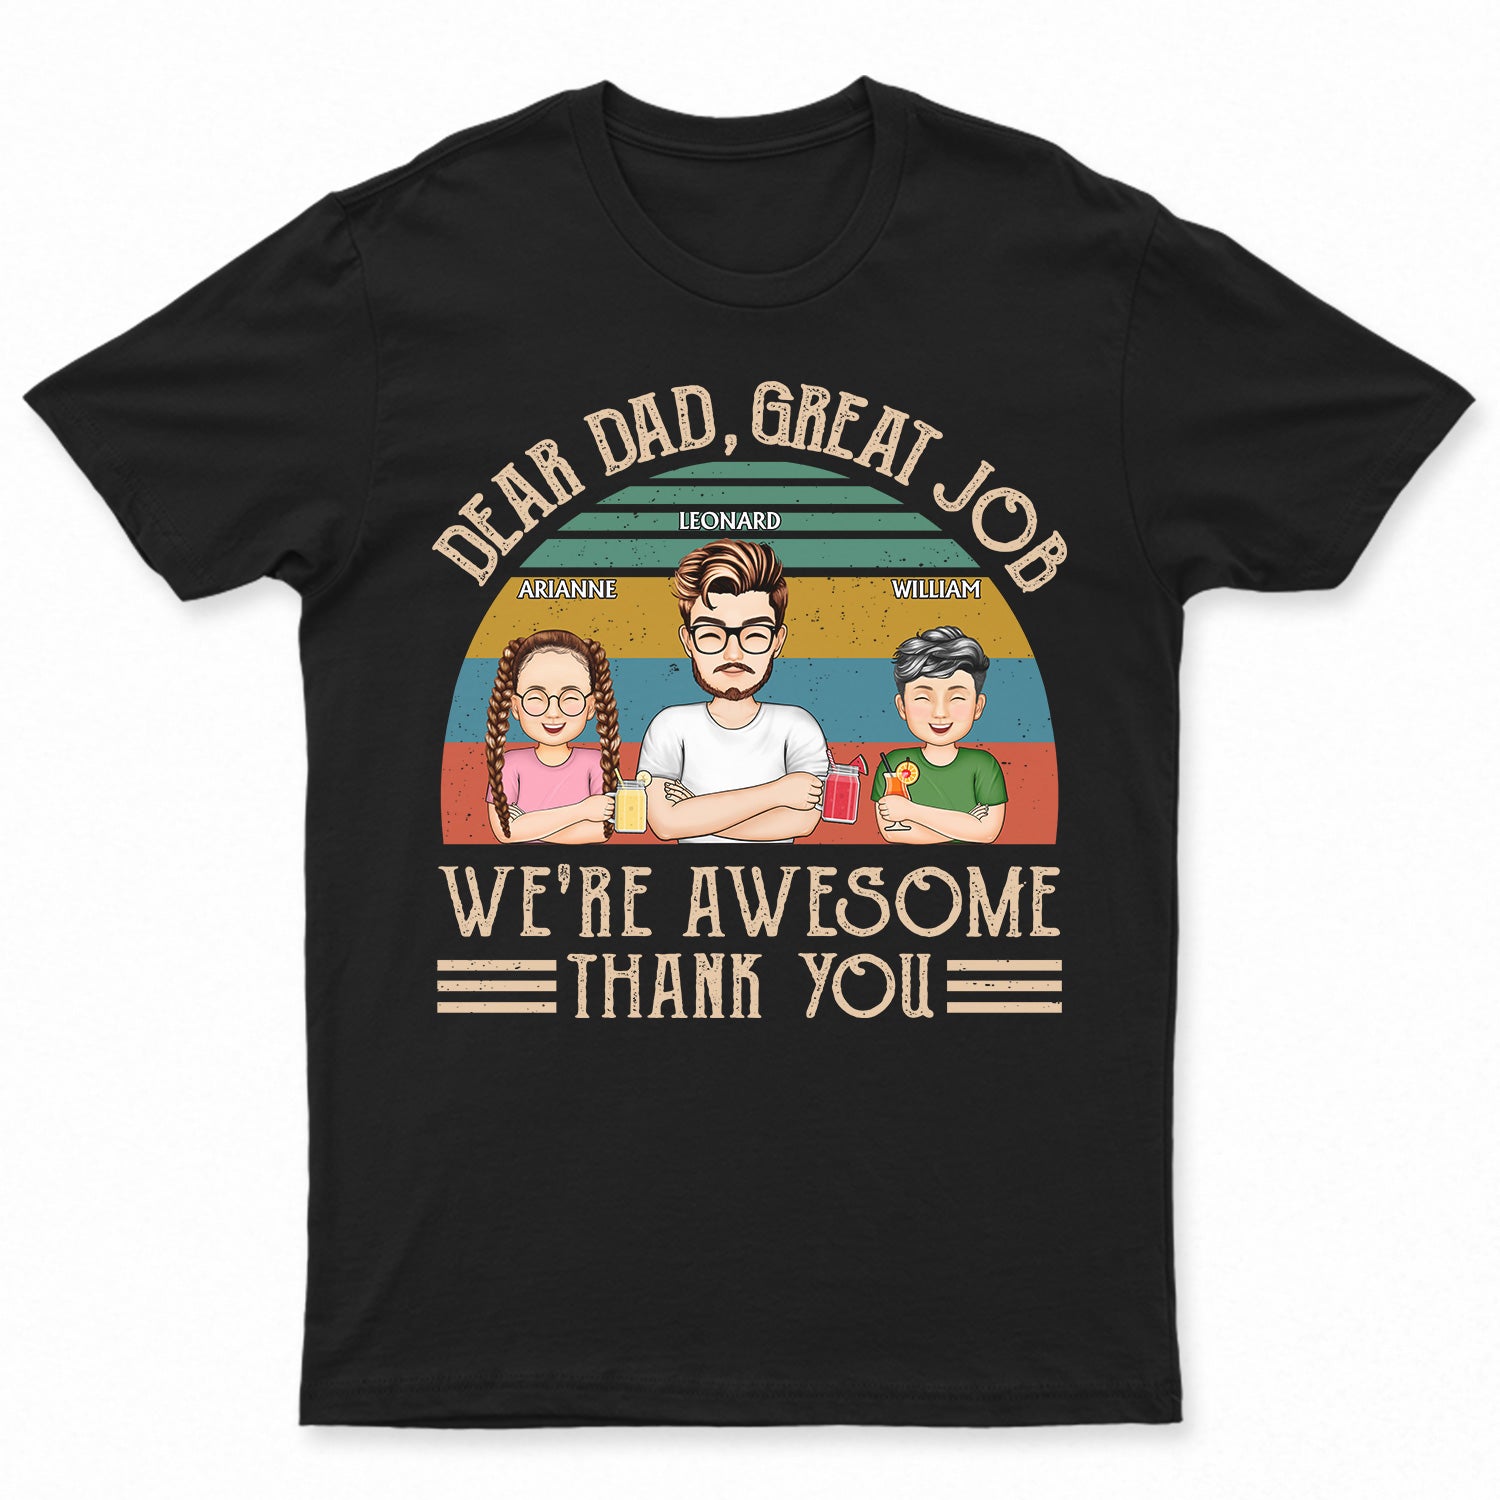 Dear Dad Great Job We're Awesome Thank You Young Cartoon - Birthday, Loving Gift For Father, Grandpa, Grandfather - Personalized Custom T Shirt